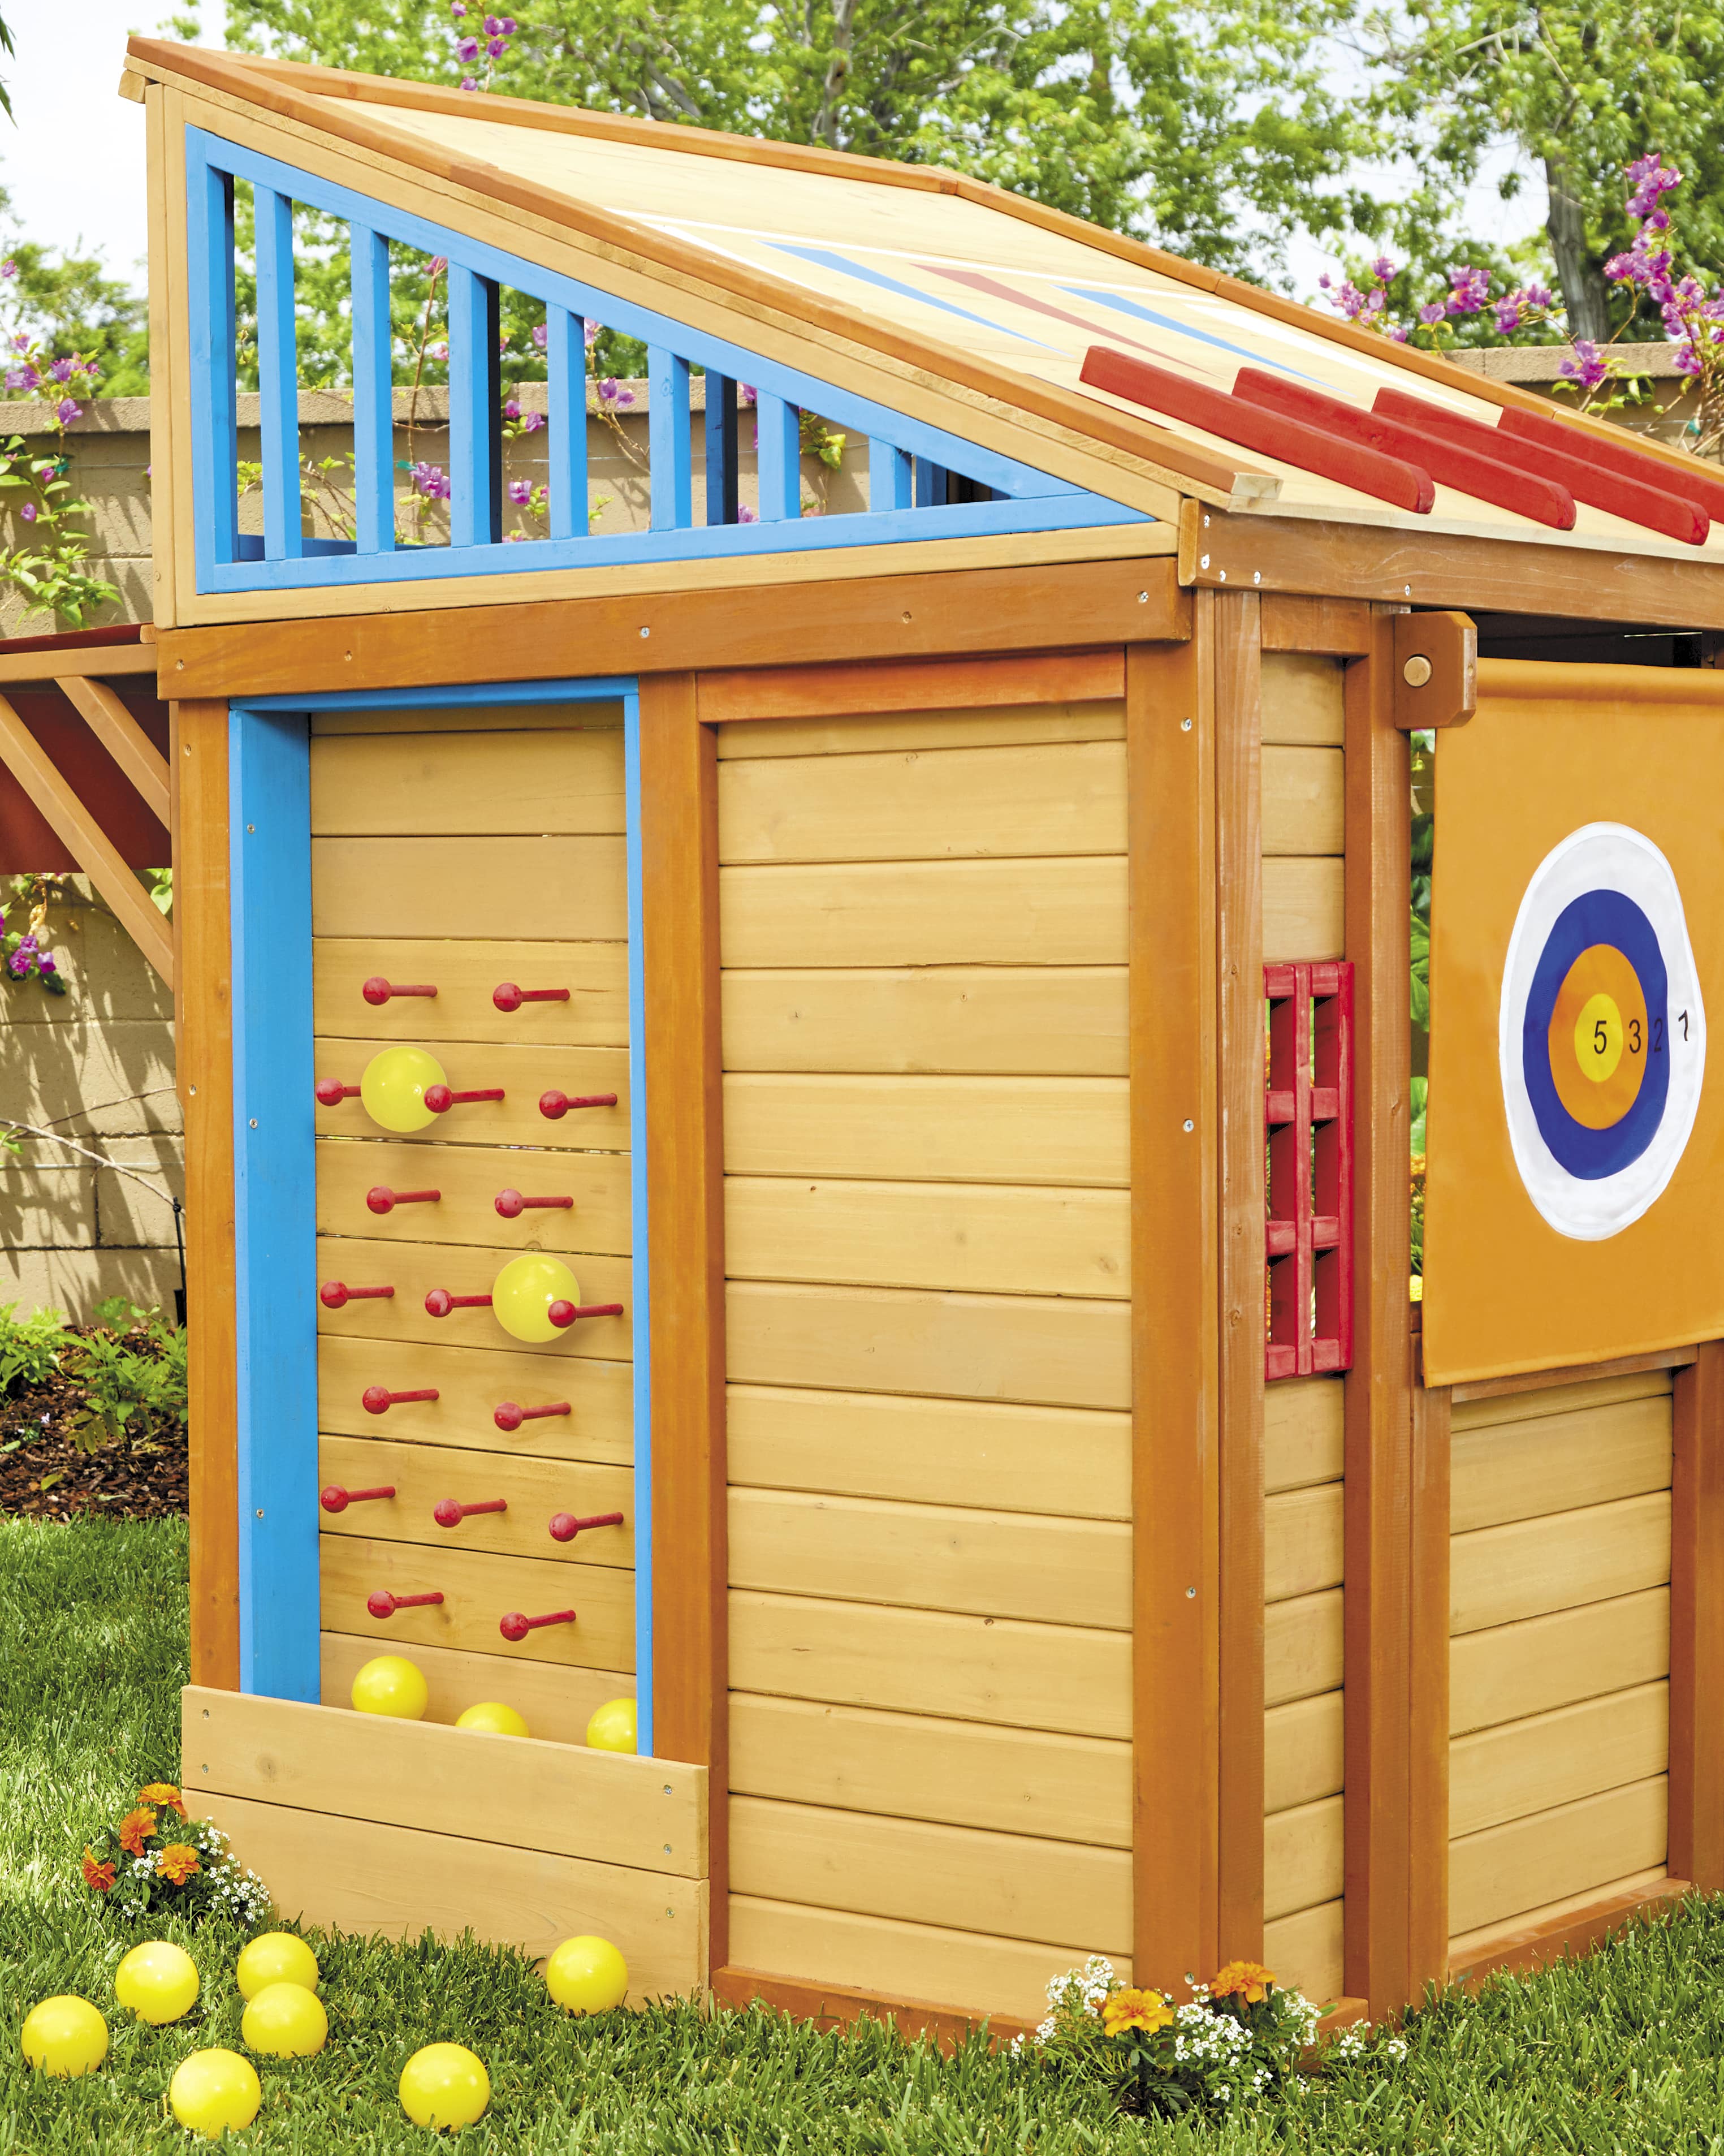 Little Tikes® Real Wood Adventures™ 5-in-1 Game House, Wooden Playhouse, Skee-Ball & More for Playground Backyard Set Suitable For Kids, Boys and Girls Ages 3+ - image 4 of 7